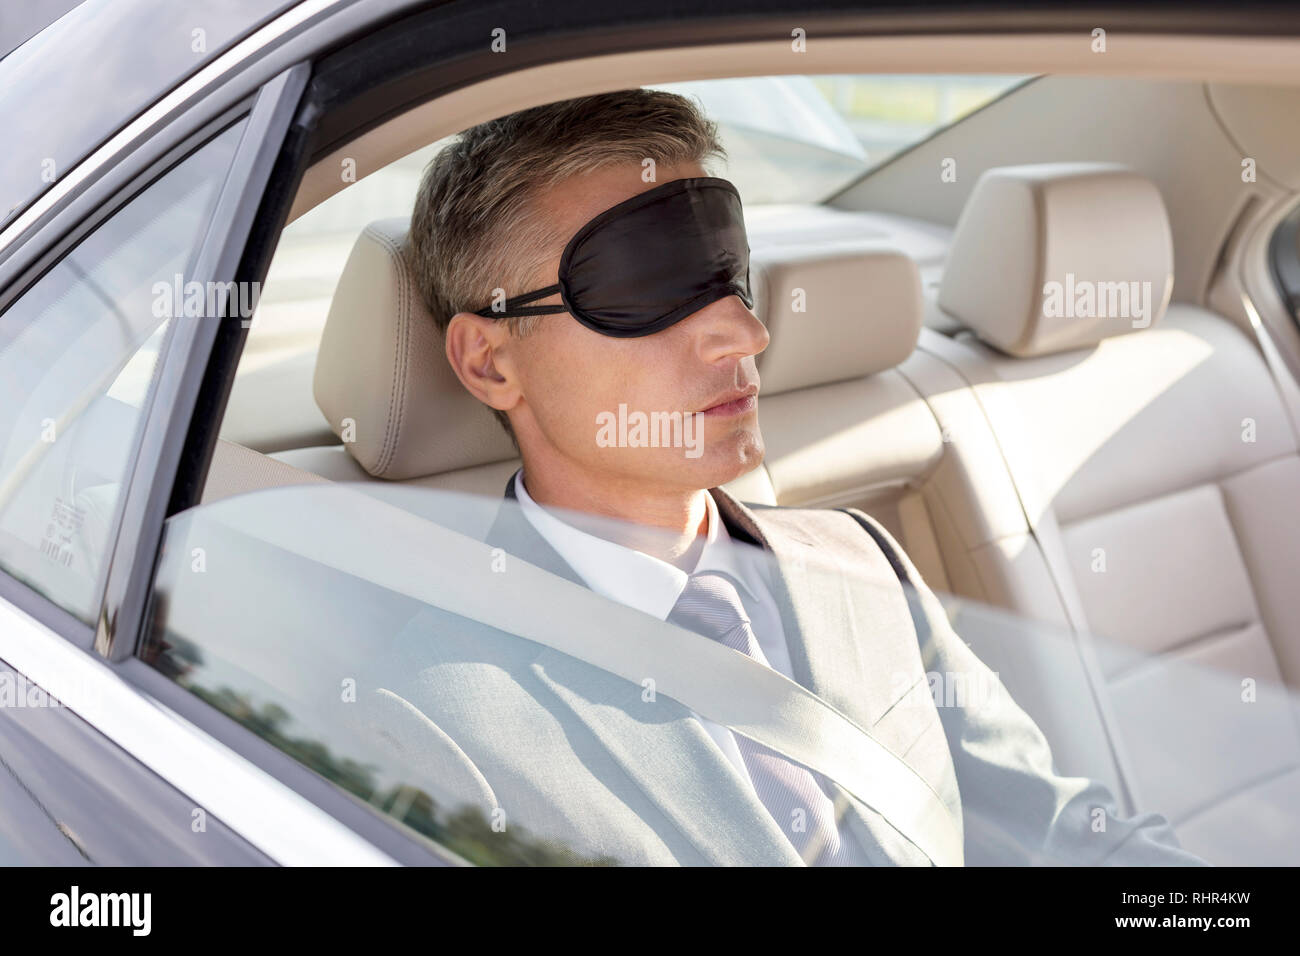 Businessman napping while wearing eye mask in car Stock Photo